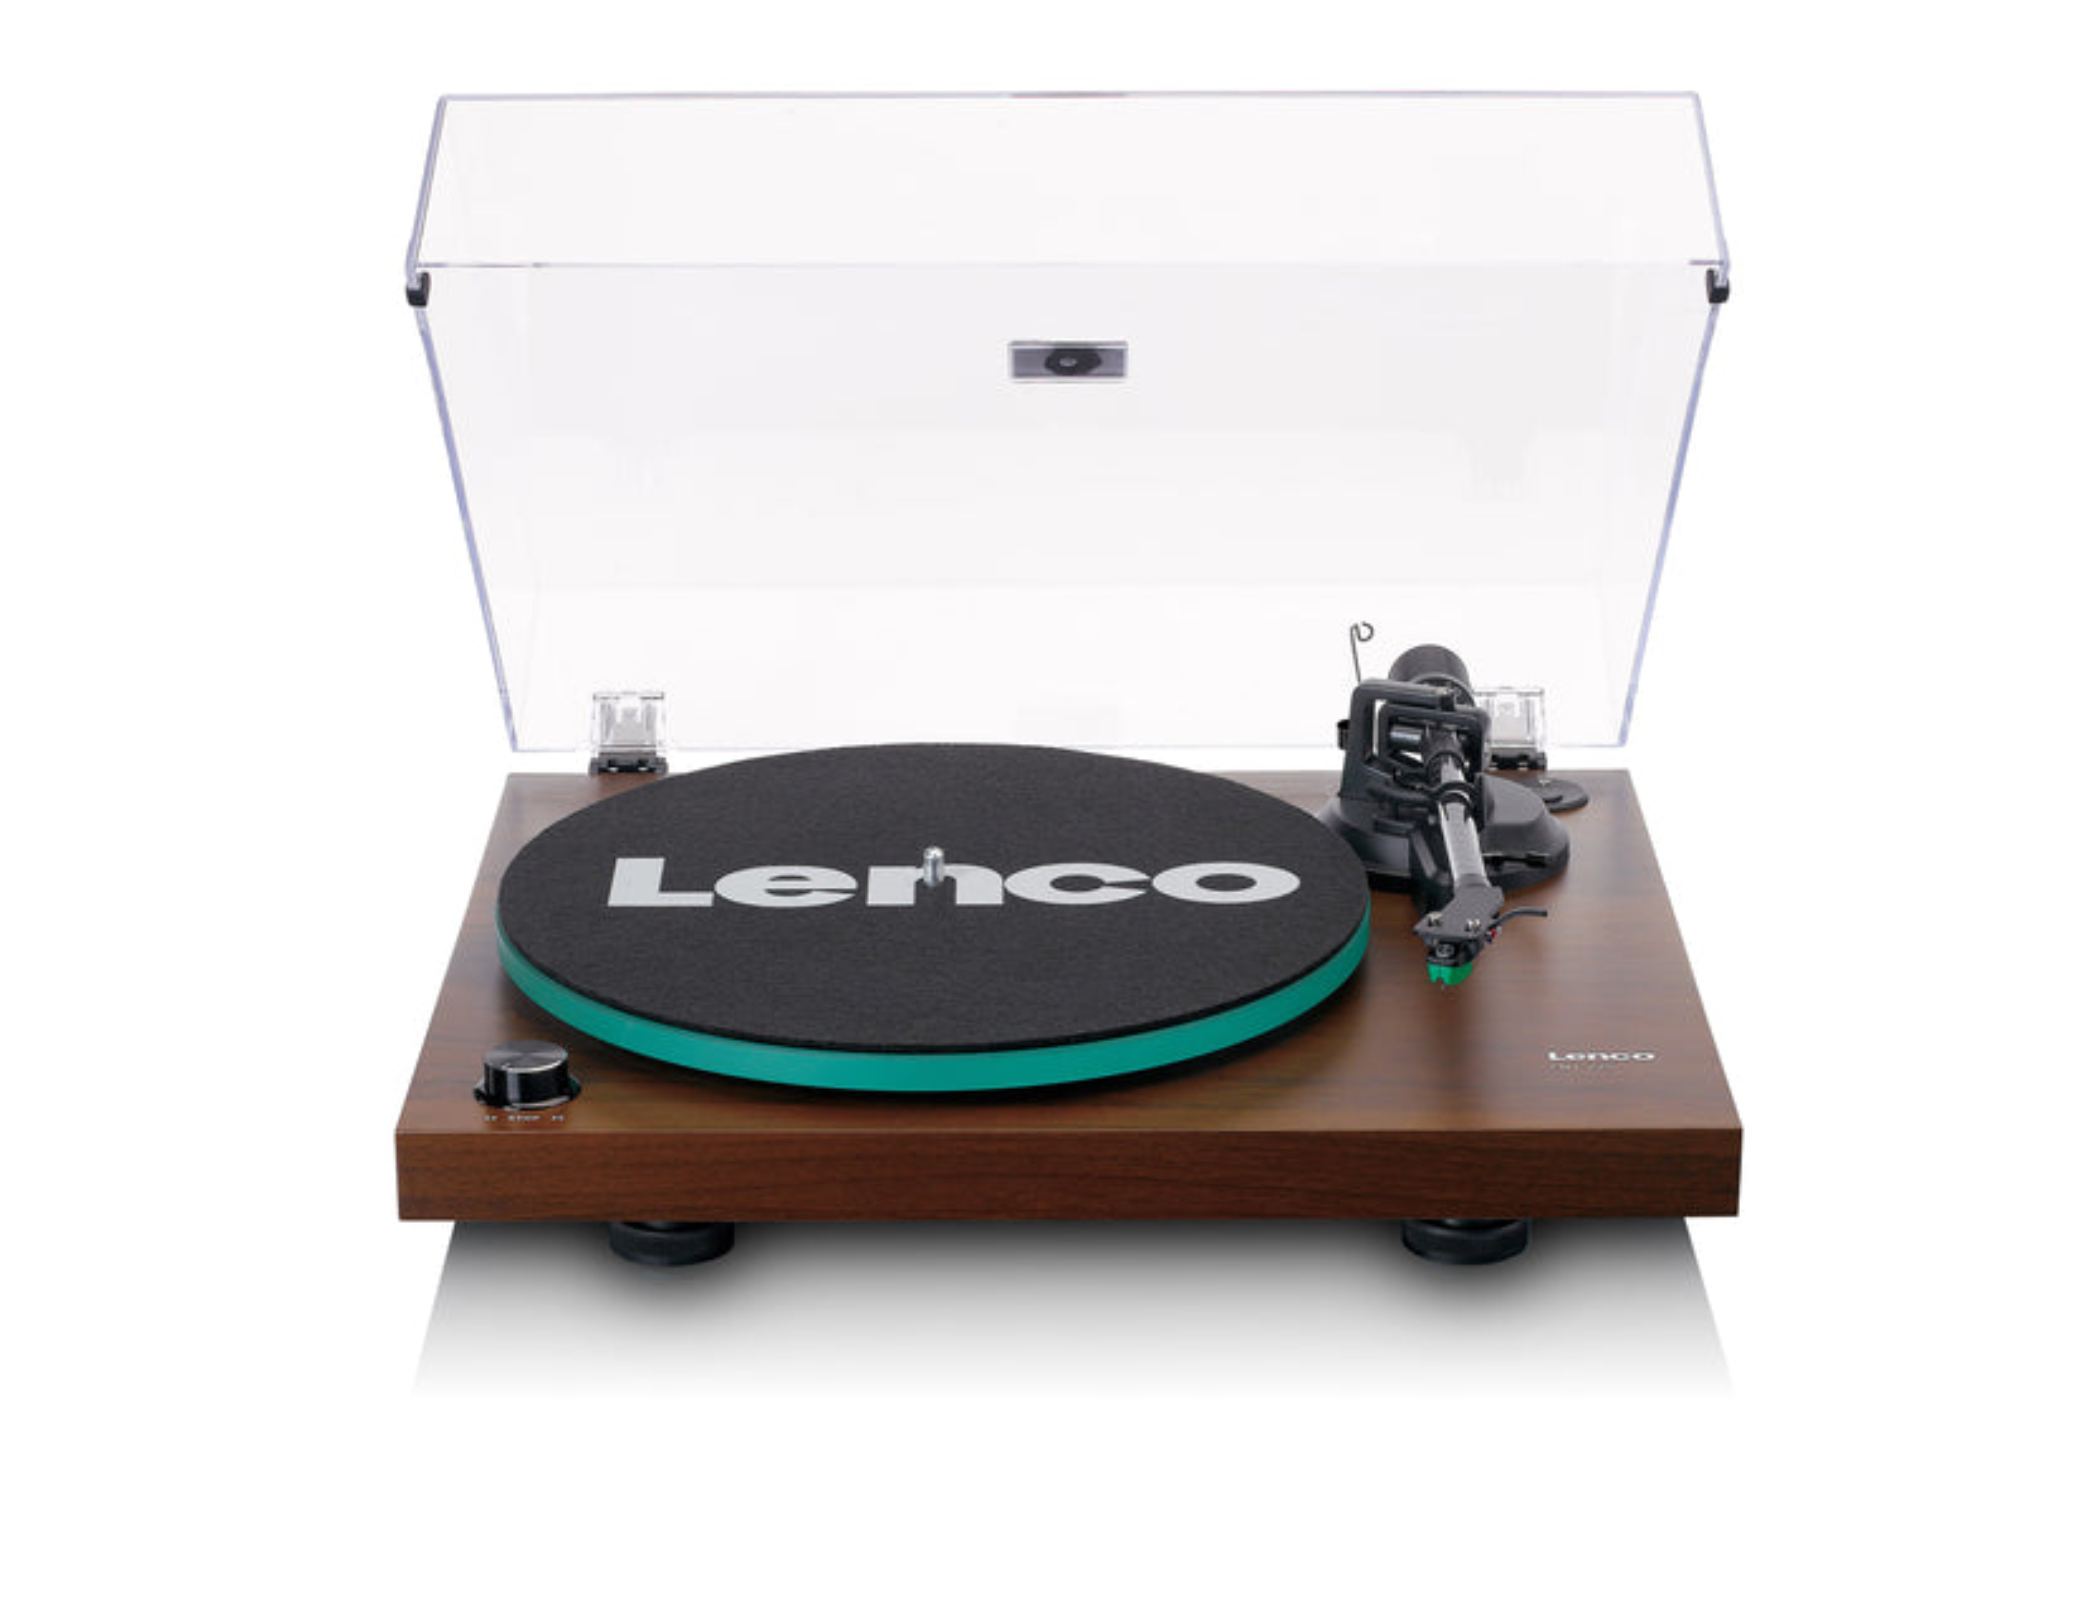 Hands-on review: Lenco LBT-225WA Bluetooth turntable with glass platter